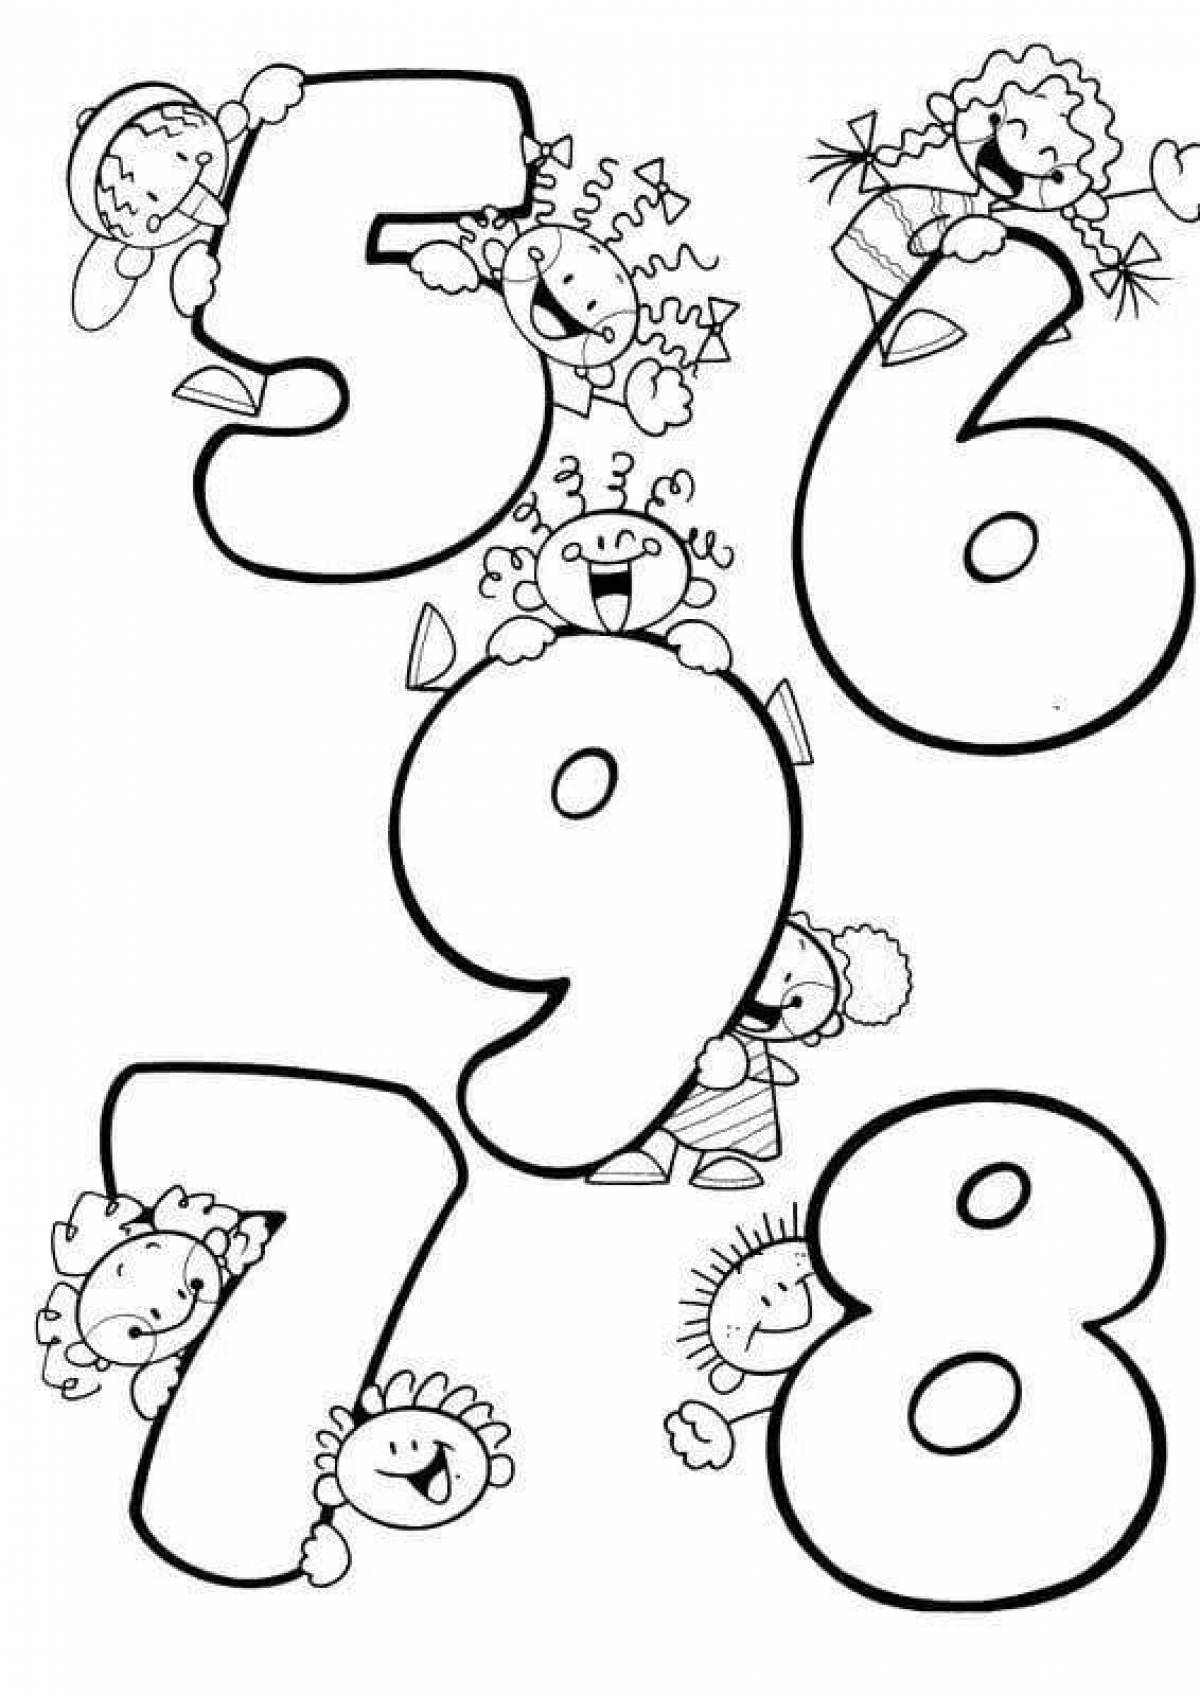 Coloring funny numbers with crazy colors